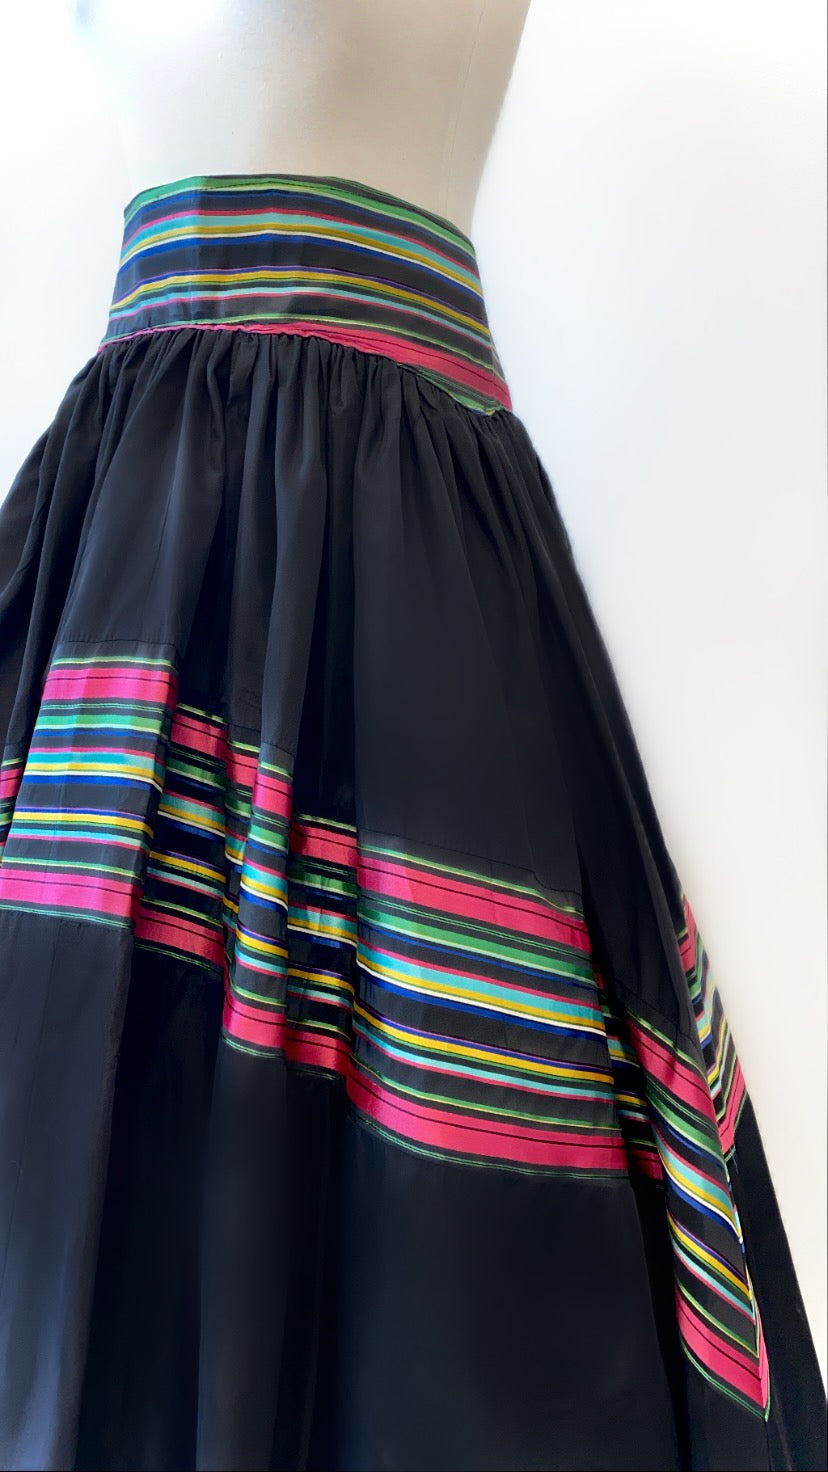 Vintage - Taffeta Maxi Skirt with Striped Waistband and Insert